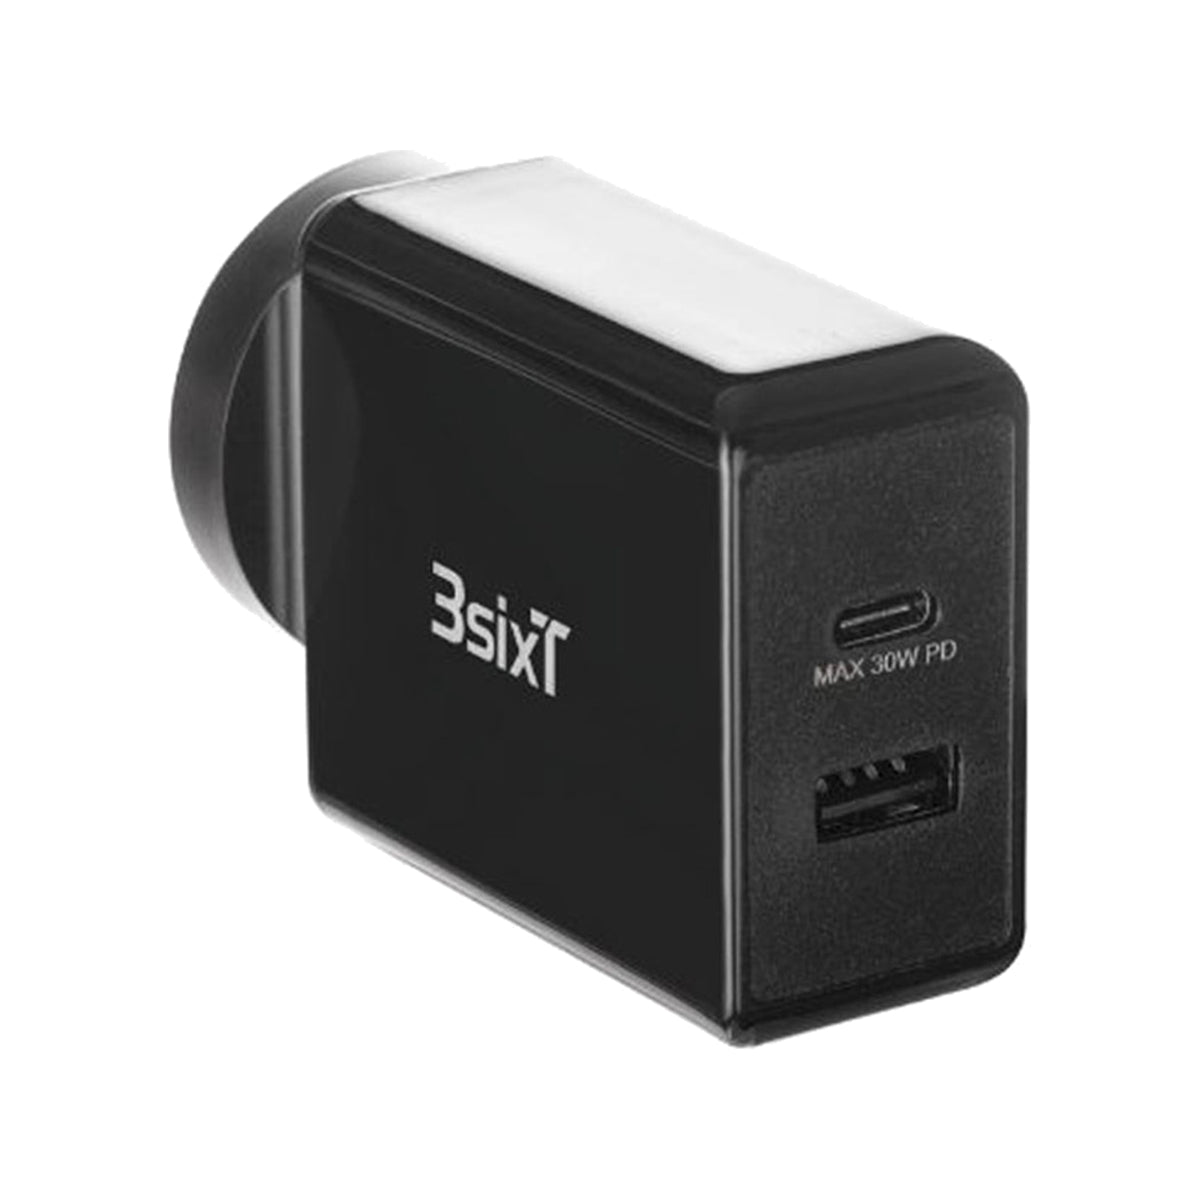 3sixT Wall Charger ANZ 30W USB-C PD + 2.4A for Mobile Phones - Black